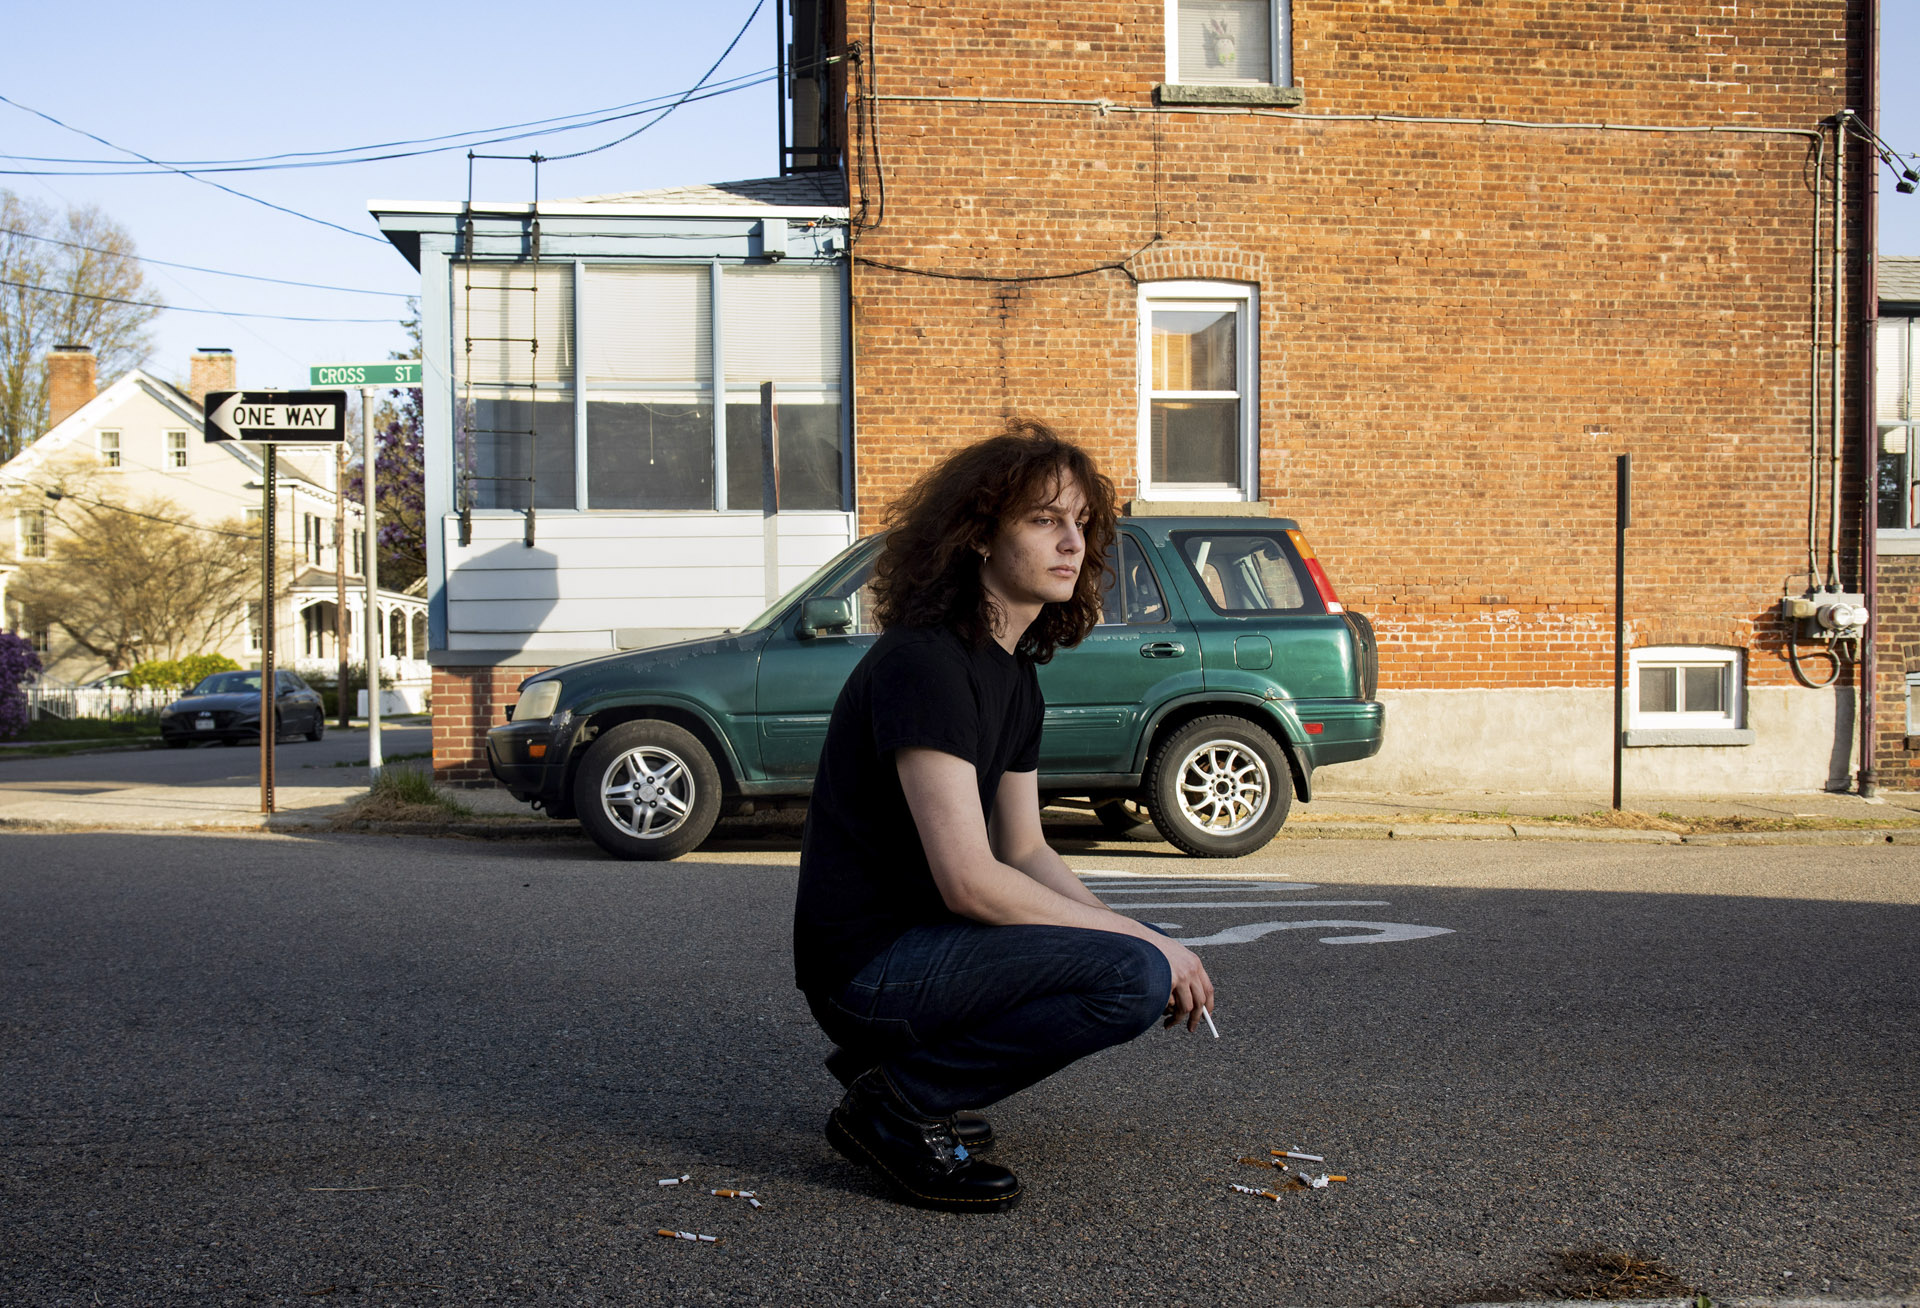 outdoor portrait of a person seating with car in background